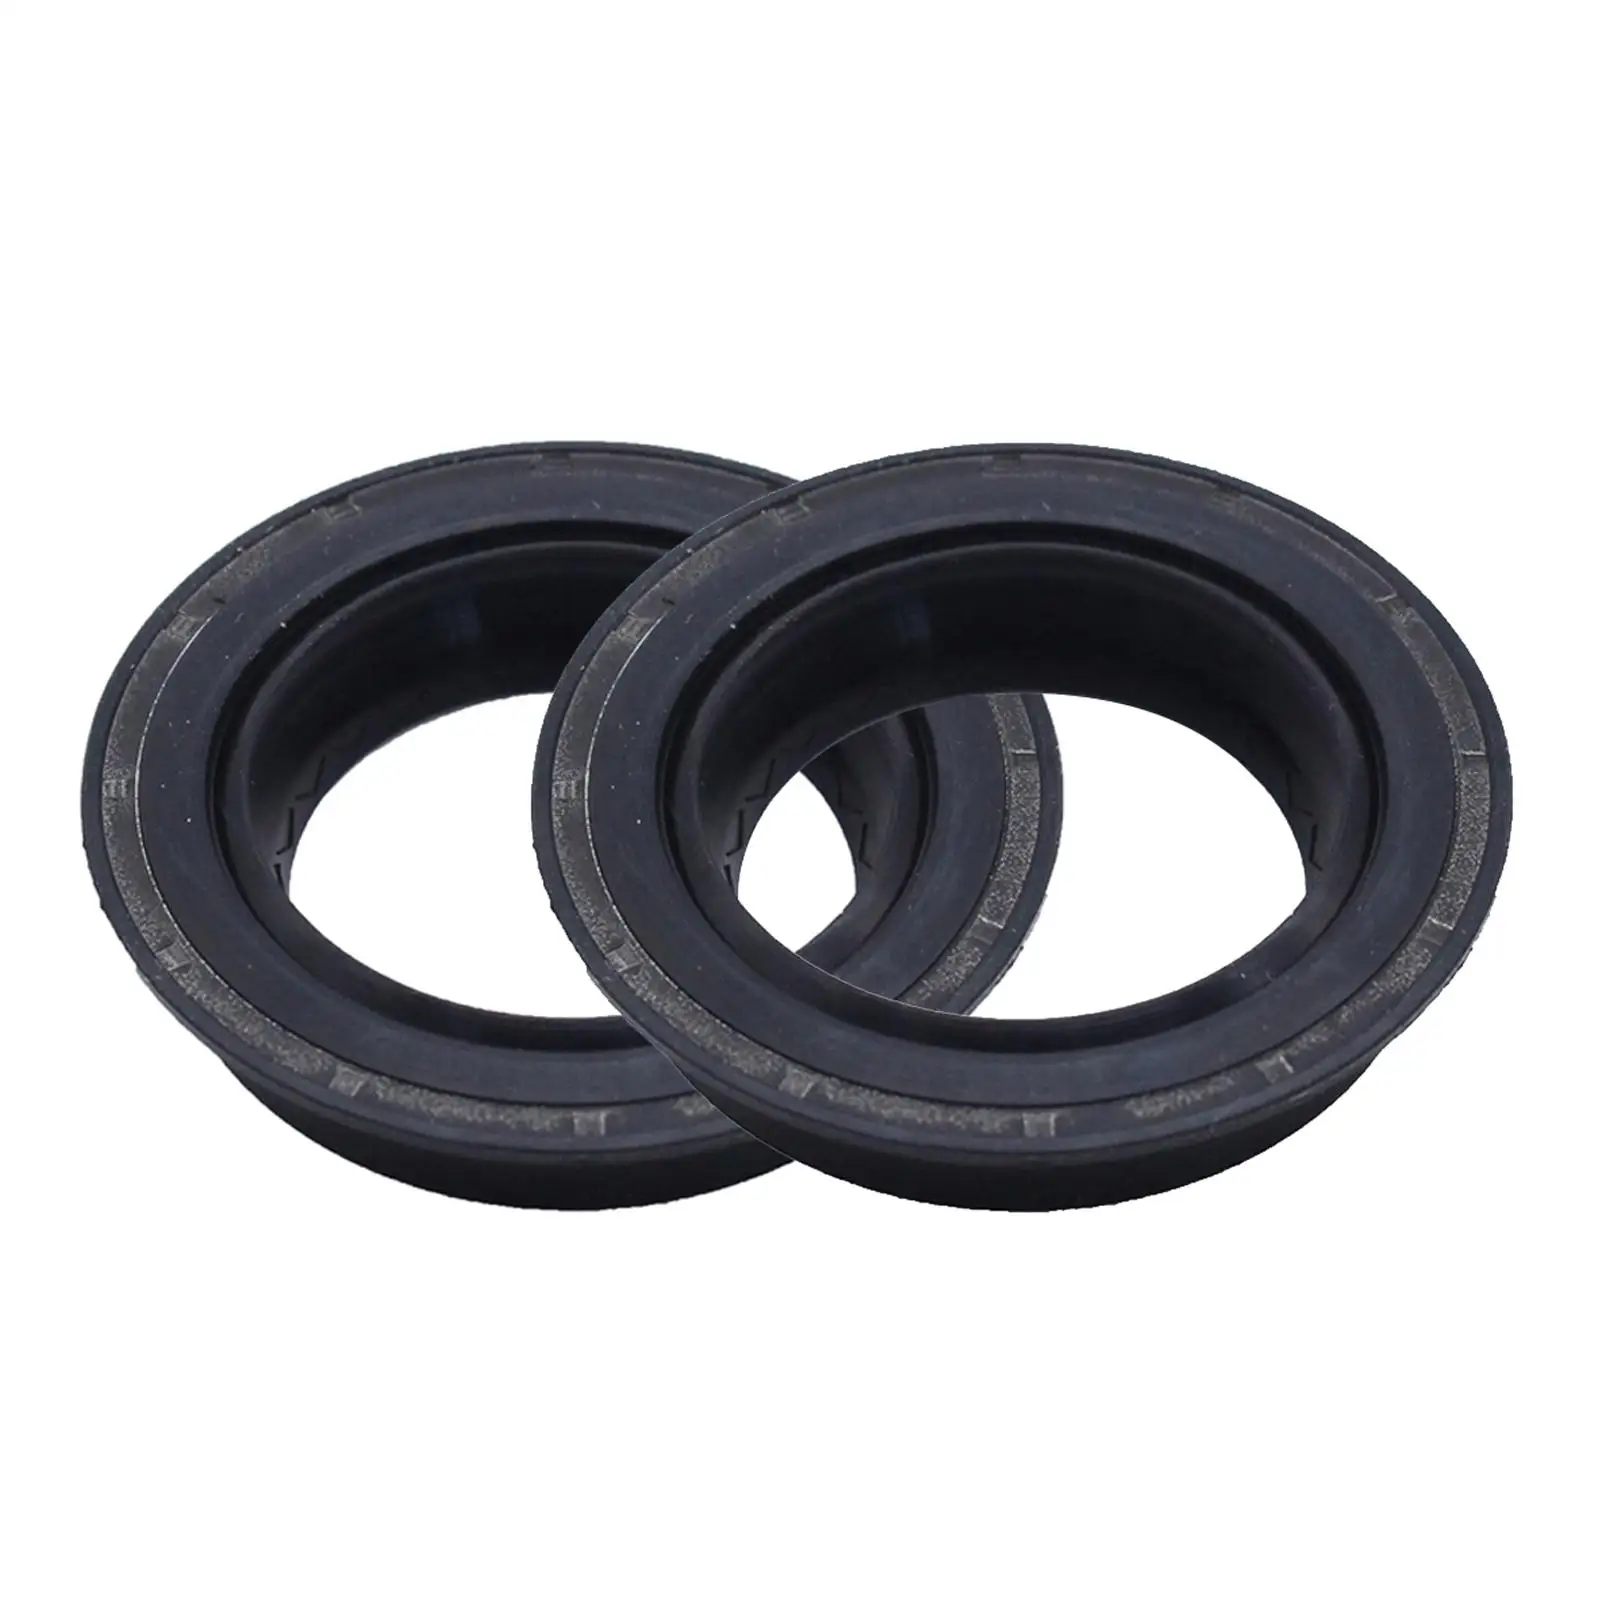 2 Packs 3037520533-01J00  Front Axle Seal Oil Seal Vehicle Interior Accessories Supplies Fit for Patrol Y60